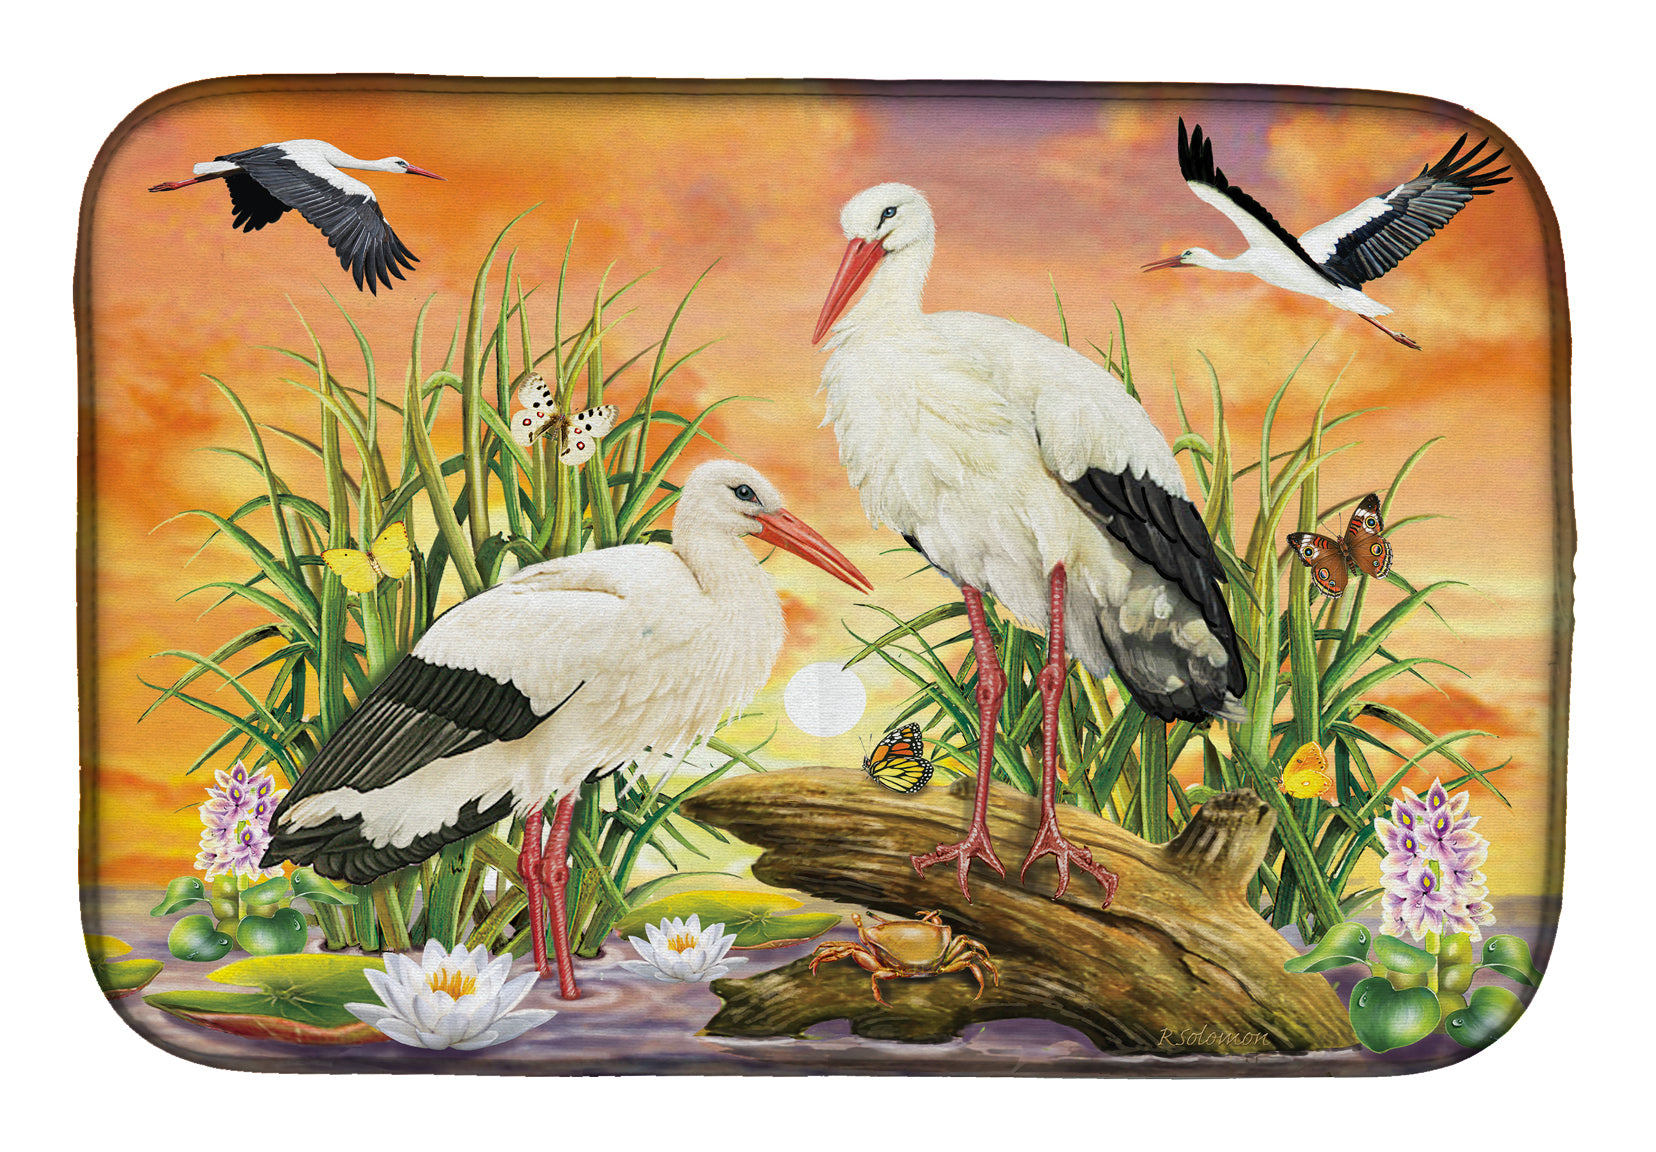 Storks Dish Drying Mat PRS4026DDM  the-store.com.